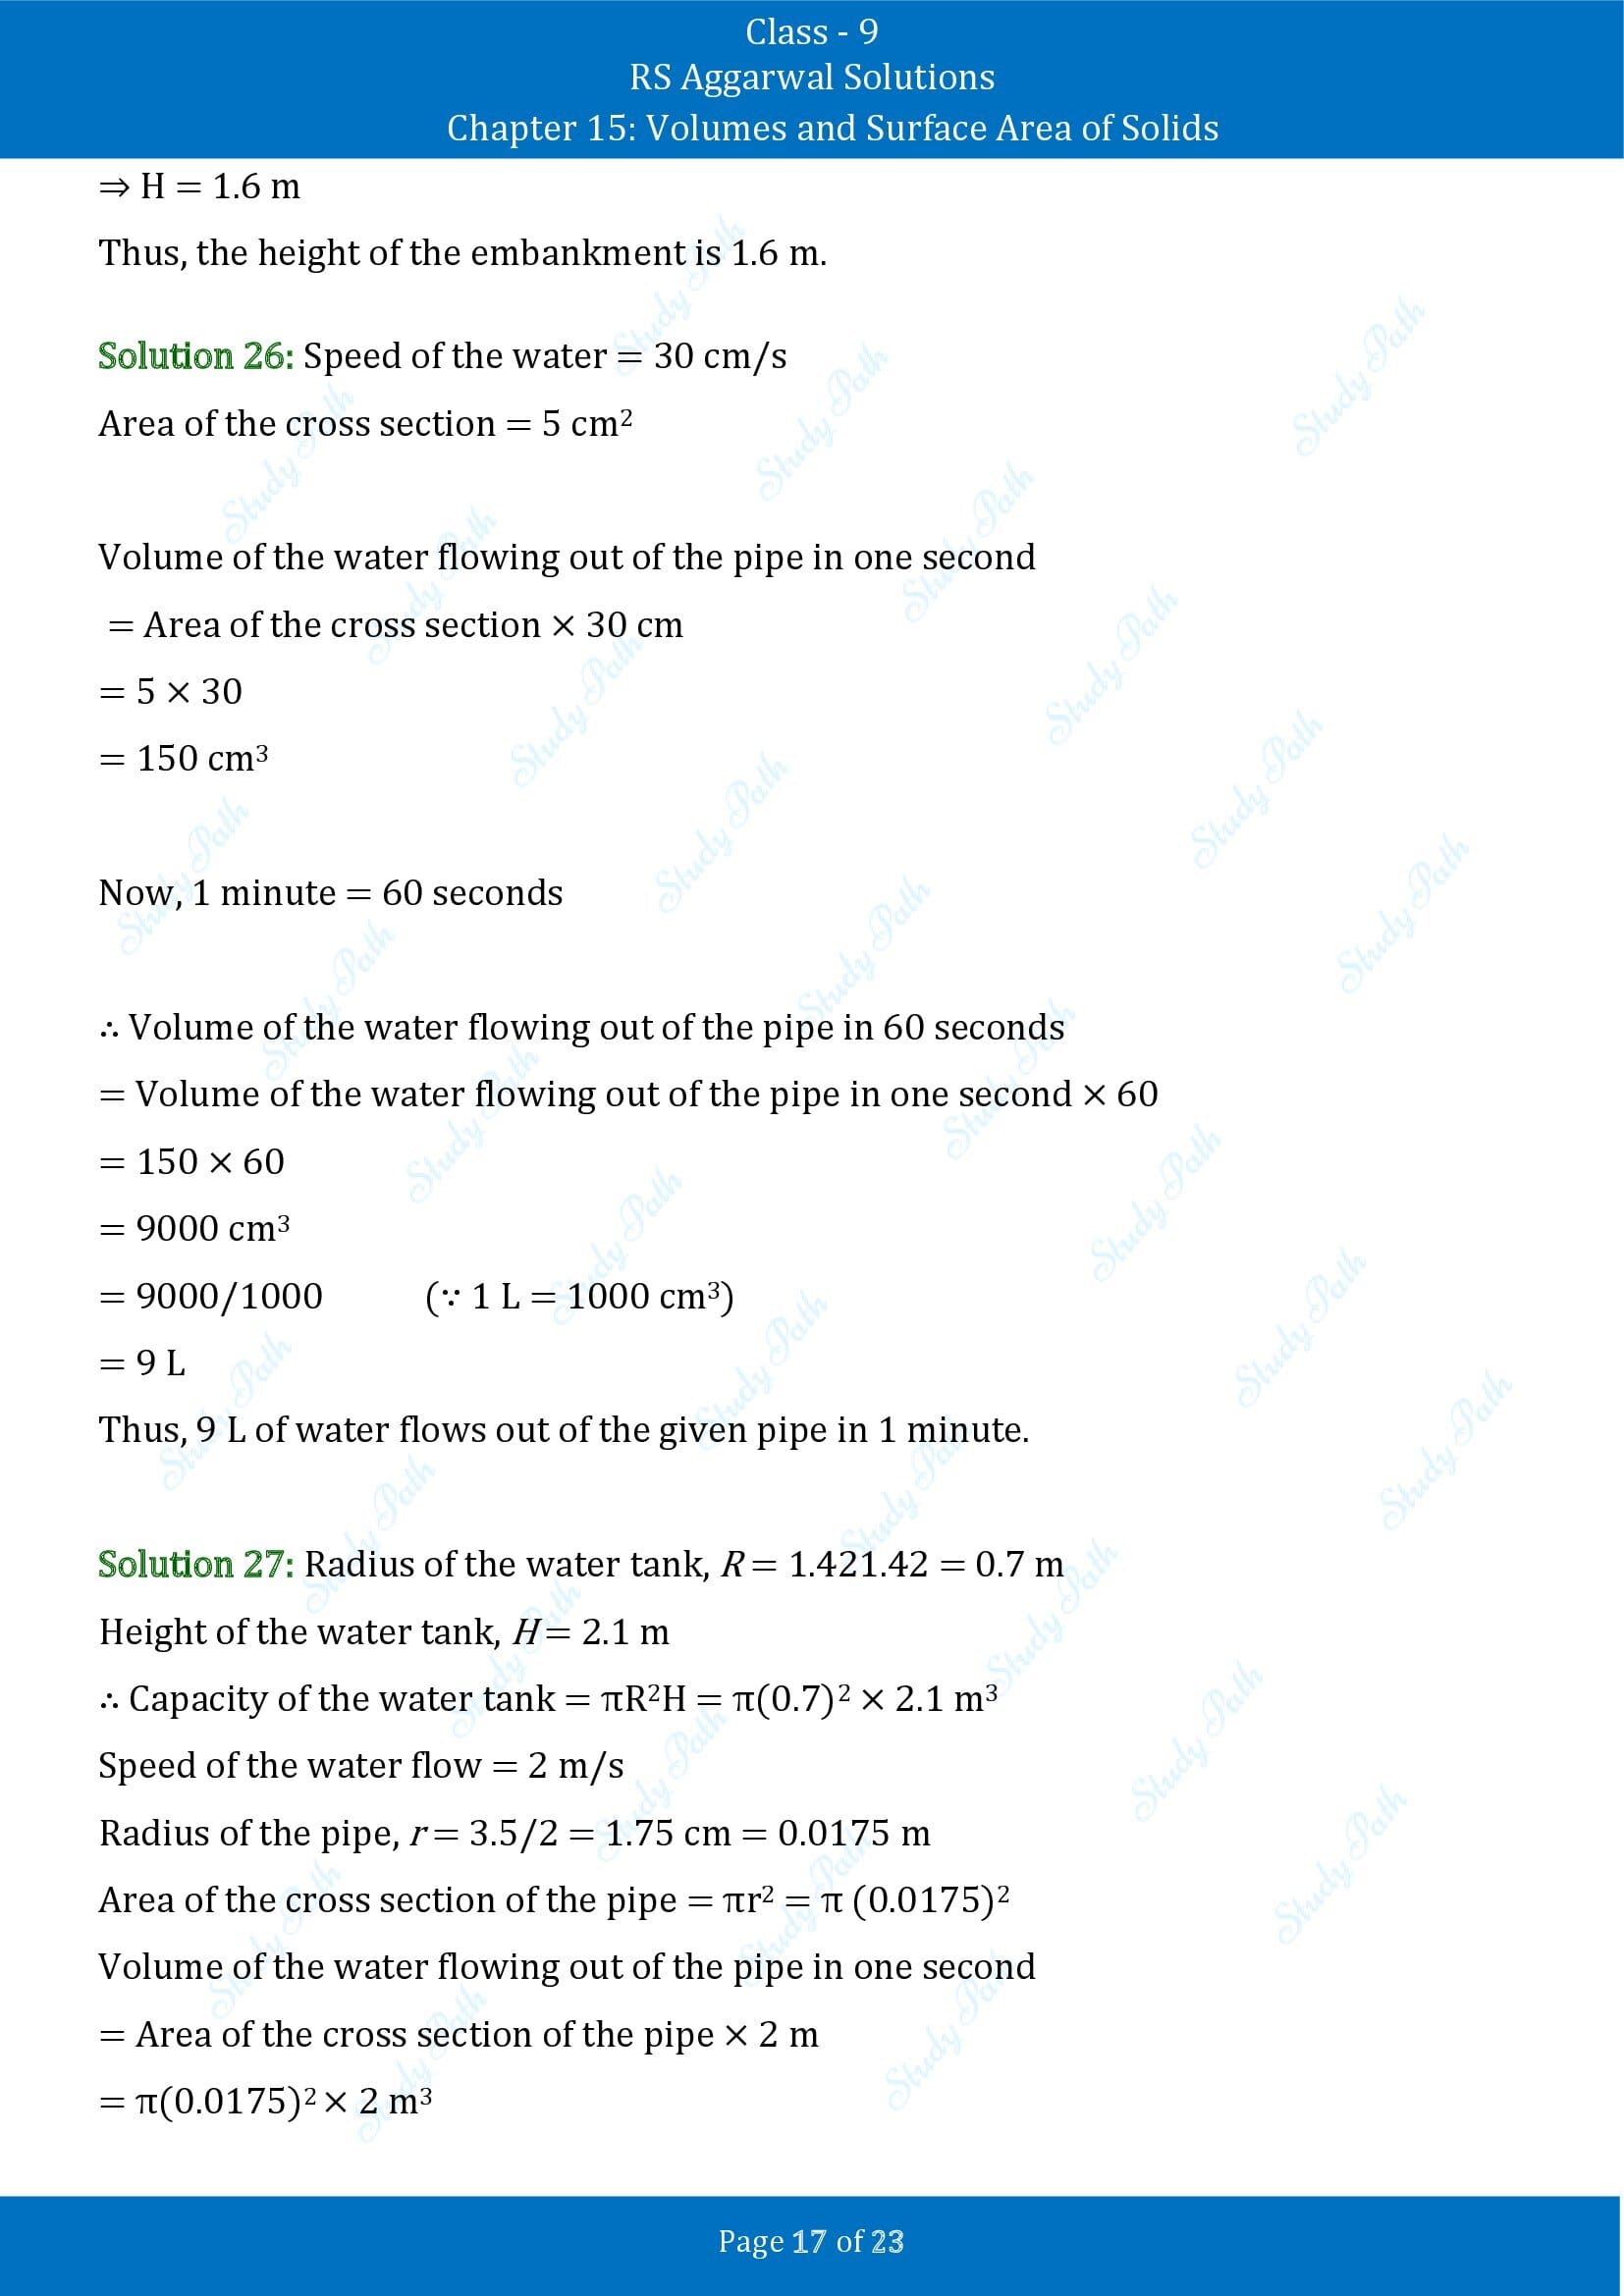 RS Aggarwal Solutions Class 9 Chapter 15 Volumes and Surface Area of Solids Exercise 15B 00017